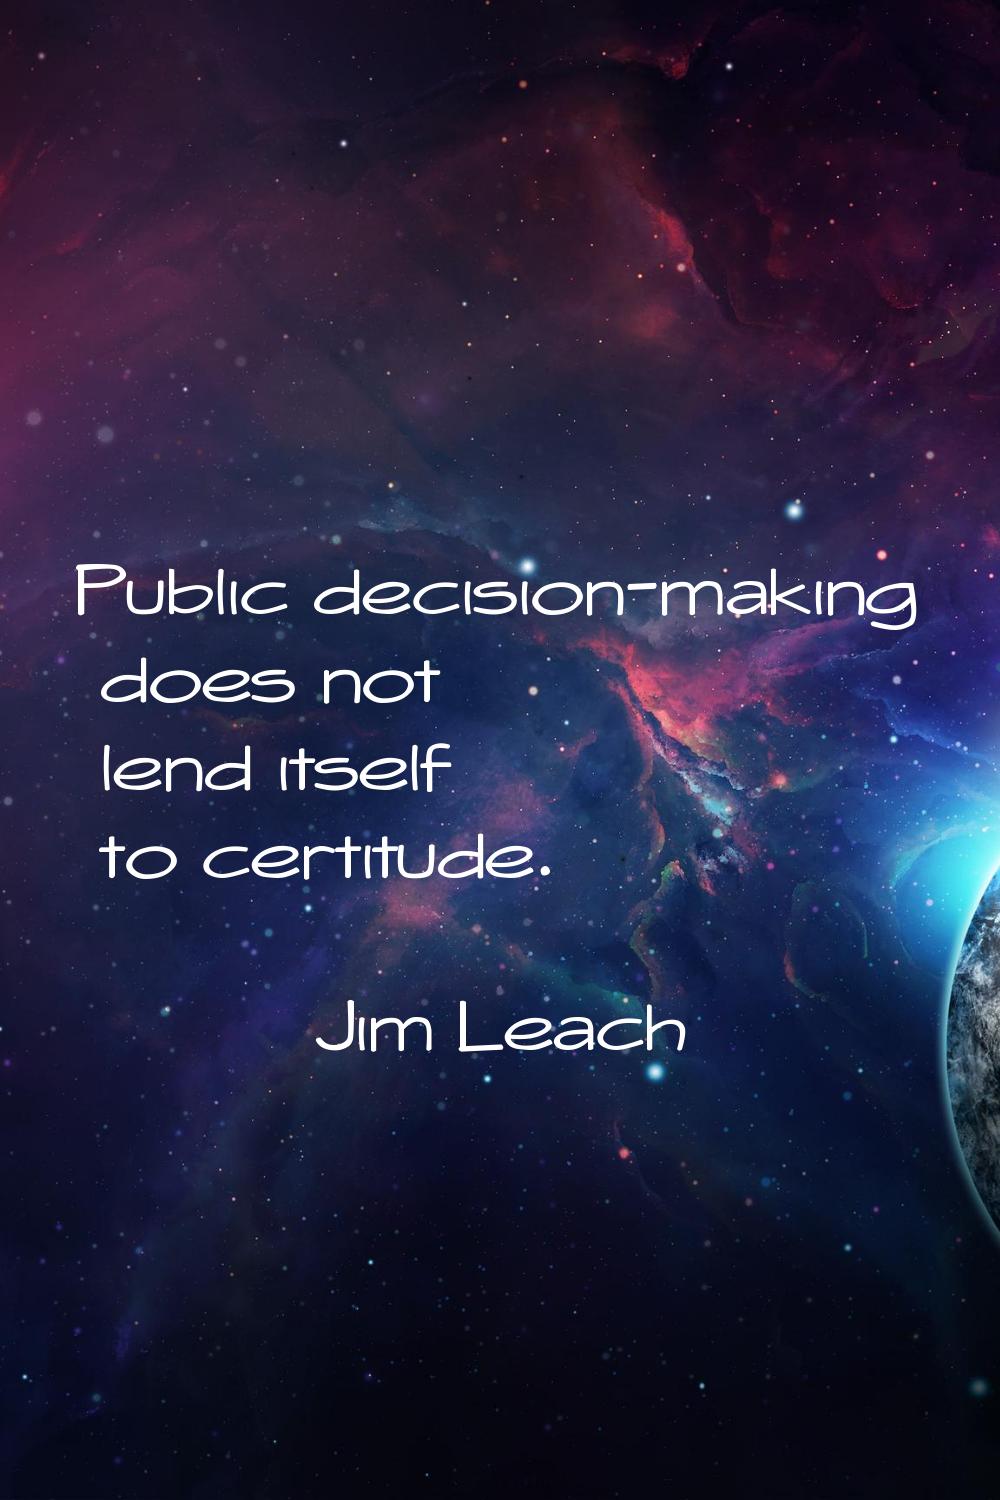 Public decision-making does not lend itself to certitude.